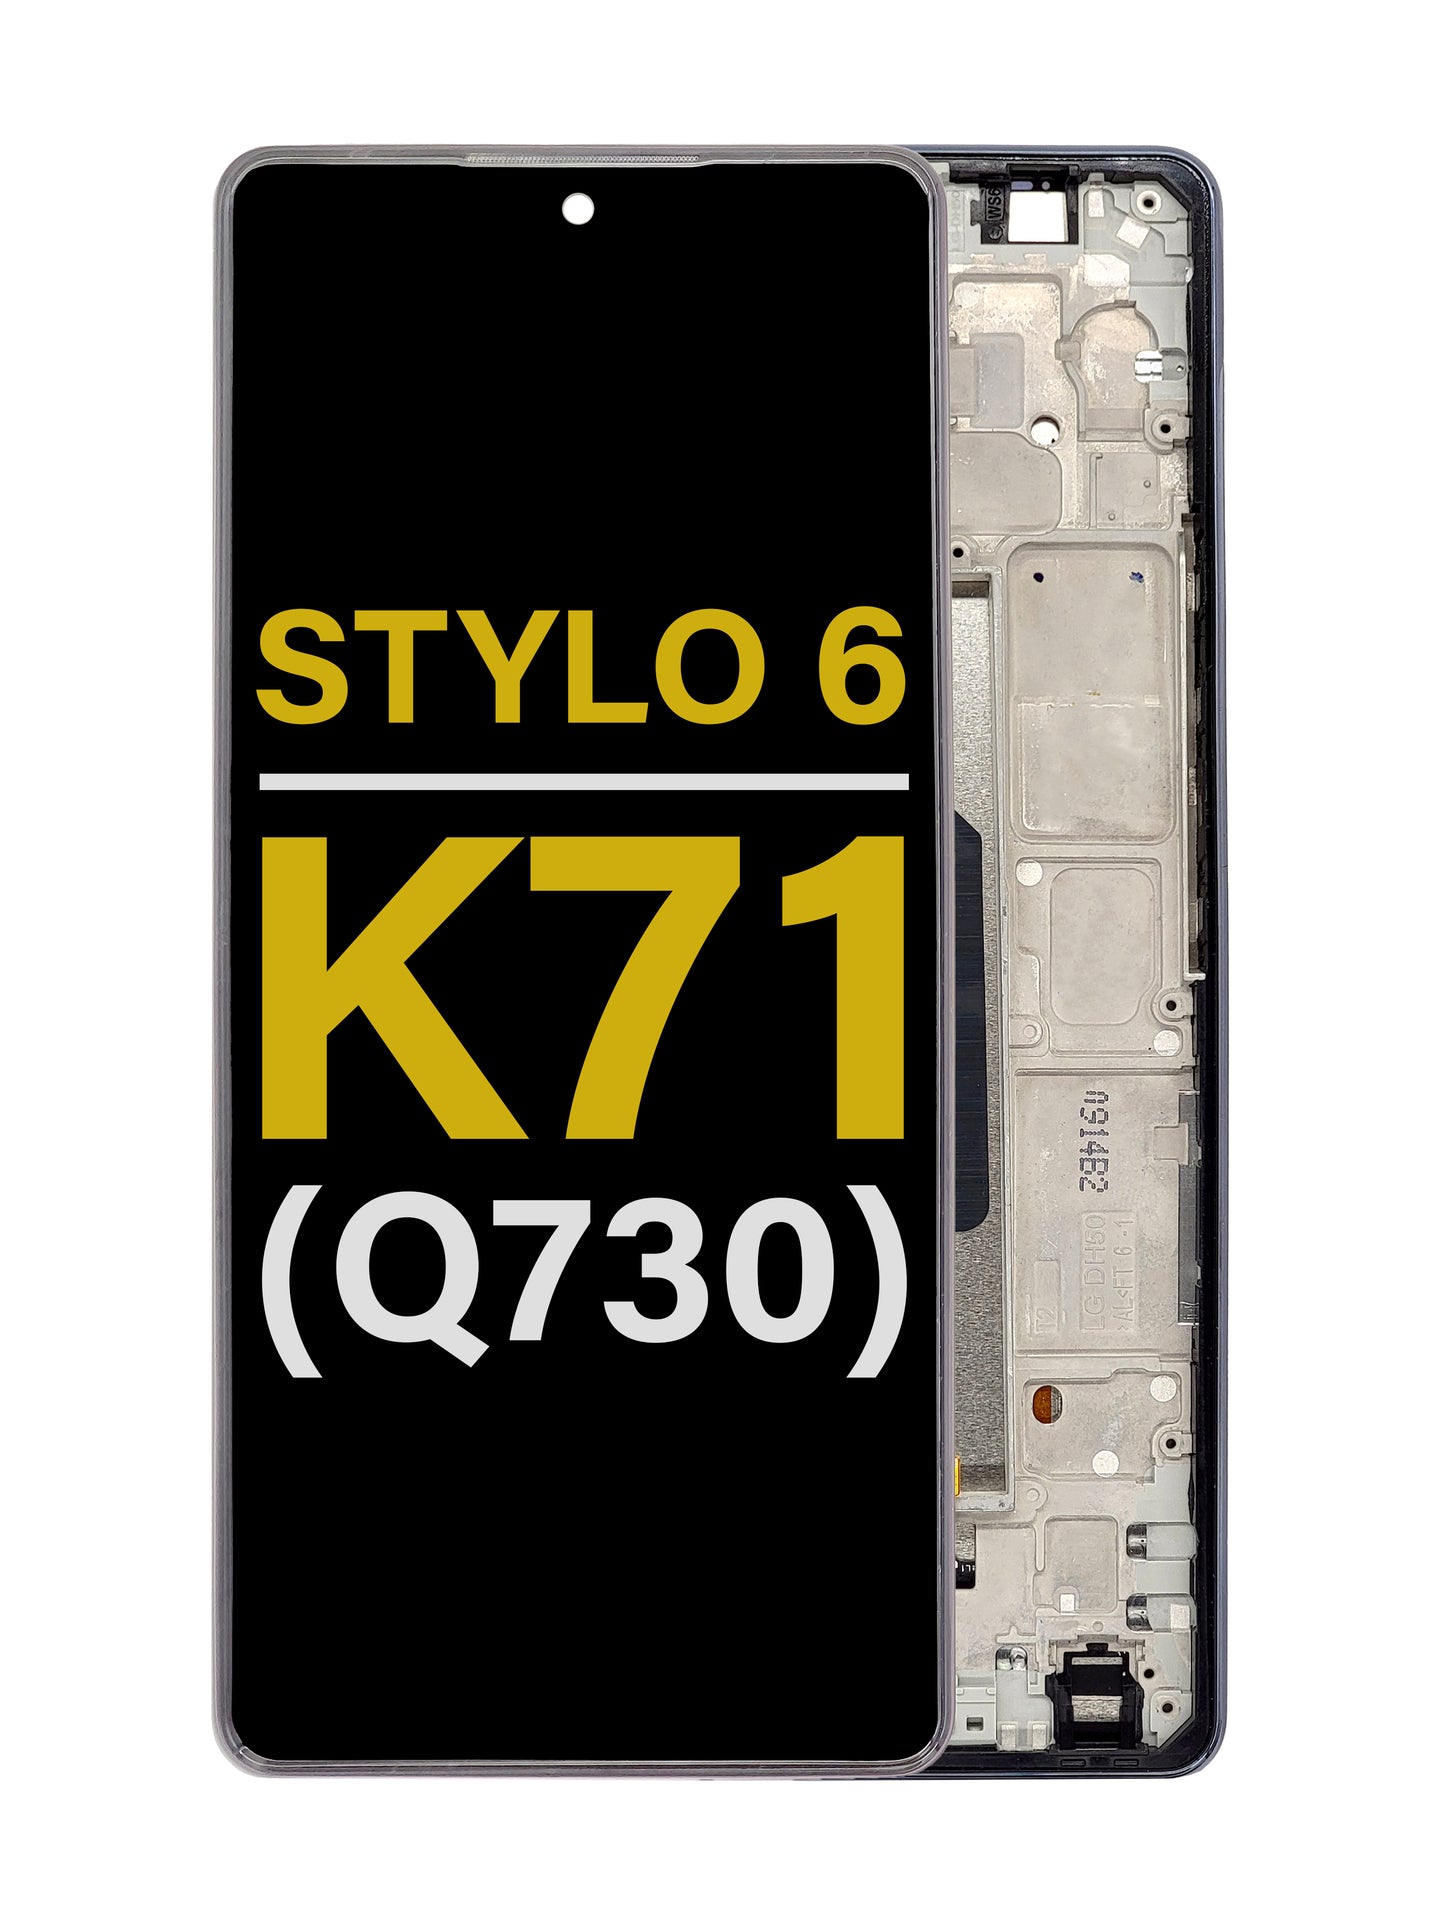 LGS Stylo 6 / K71 (Q730) Screen Assembly (With The Frame) (Refurbished) (Black)